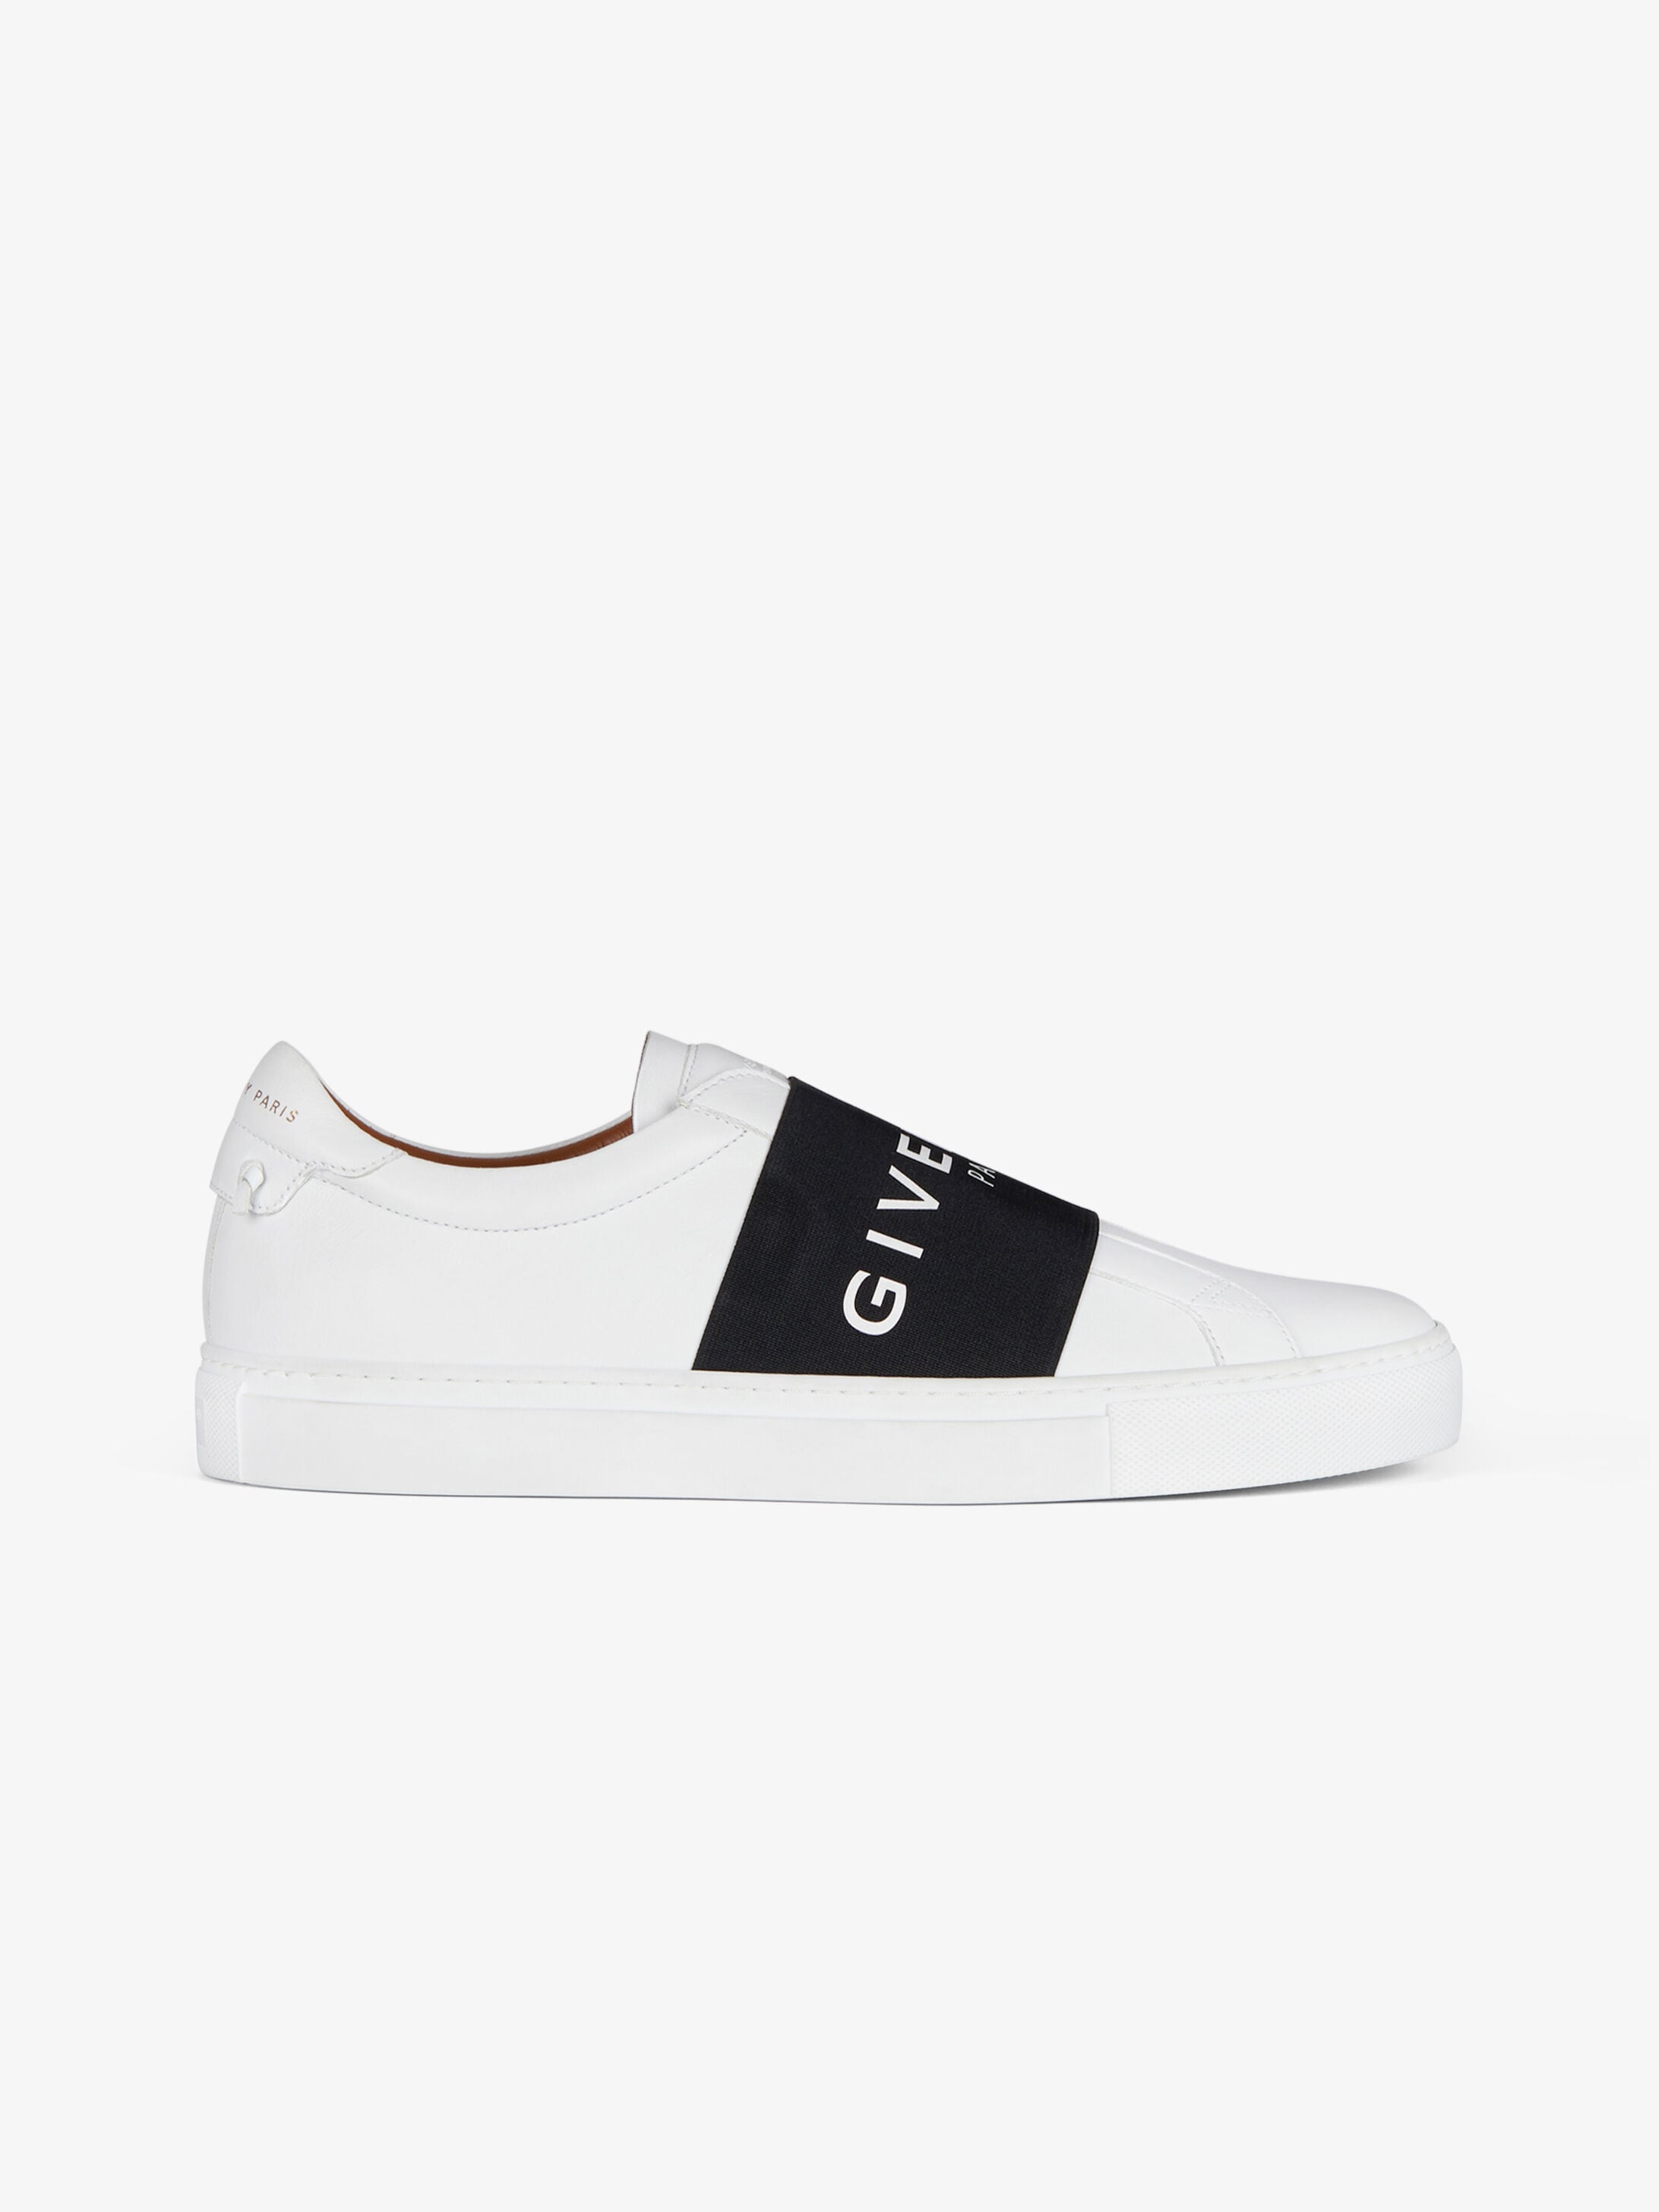 Givenchy Mens Sneakers Size Chart